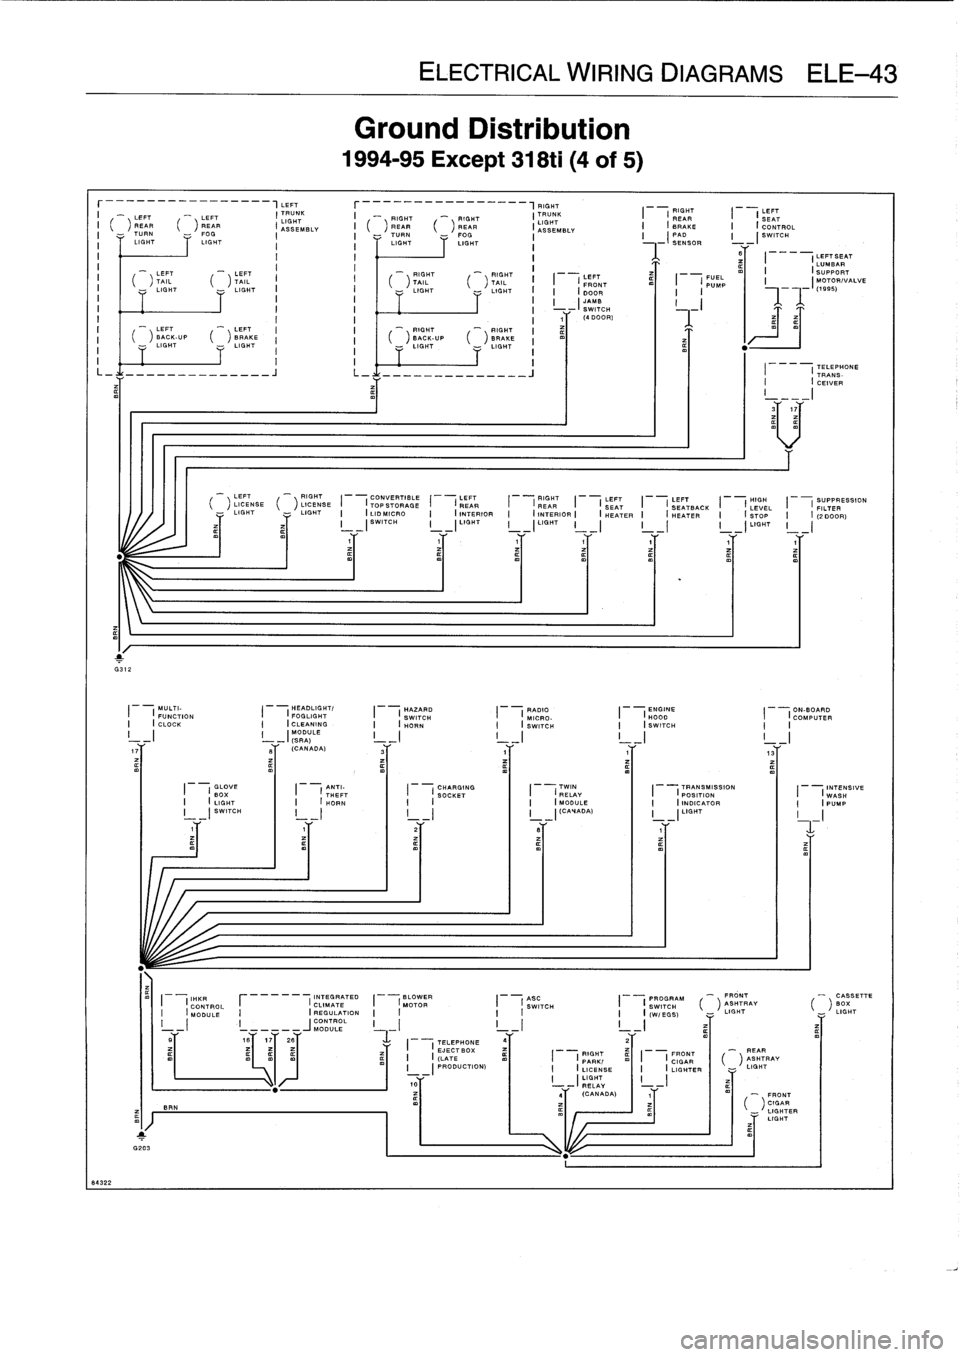 BMW 328i 1997 E36 Repair Manual 
ELECTRICAL
WIRING
DIAGRAMSELE-43

r----------_-__--,LEFT

	

r---__-------~_--,FIGHT
I

	

-

	

RIGHT

	

LIT
LEFT

	

"-

	

LEFT

	

I
IGHT
K

	

I

	

_

	

RIGHT

	



	

RIGHT

	

I
TRUNK
SEM